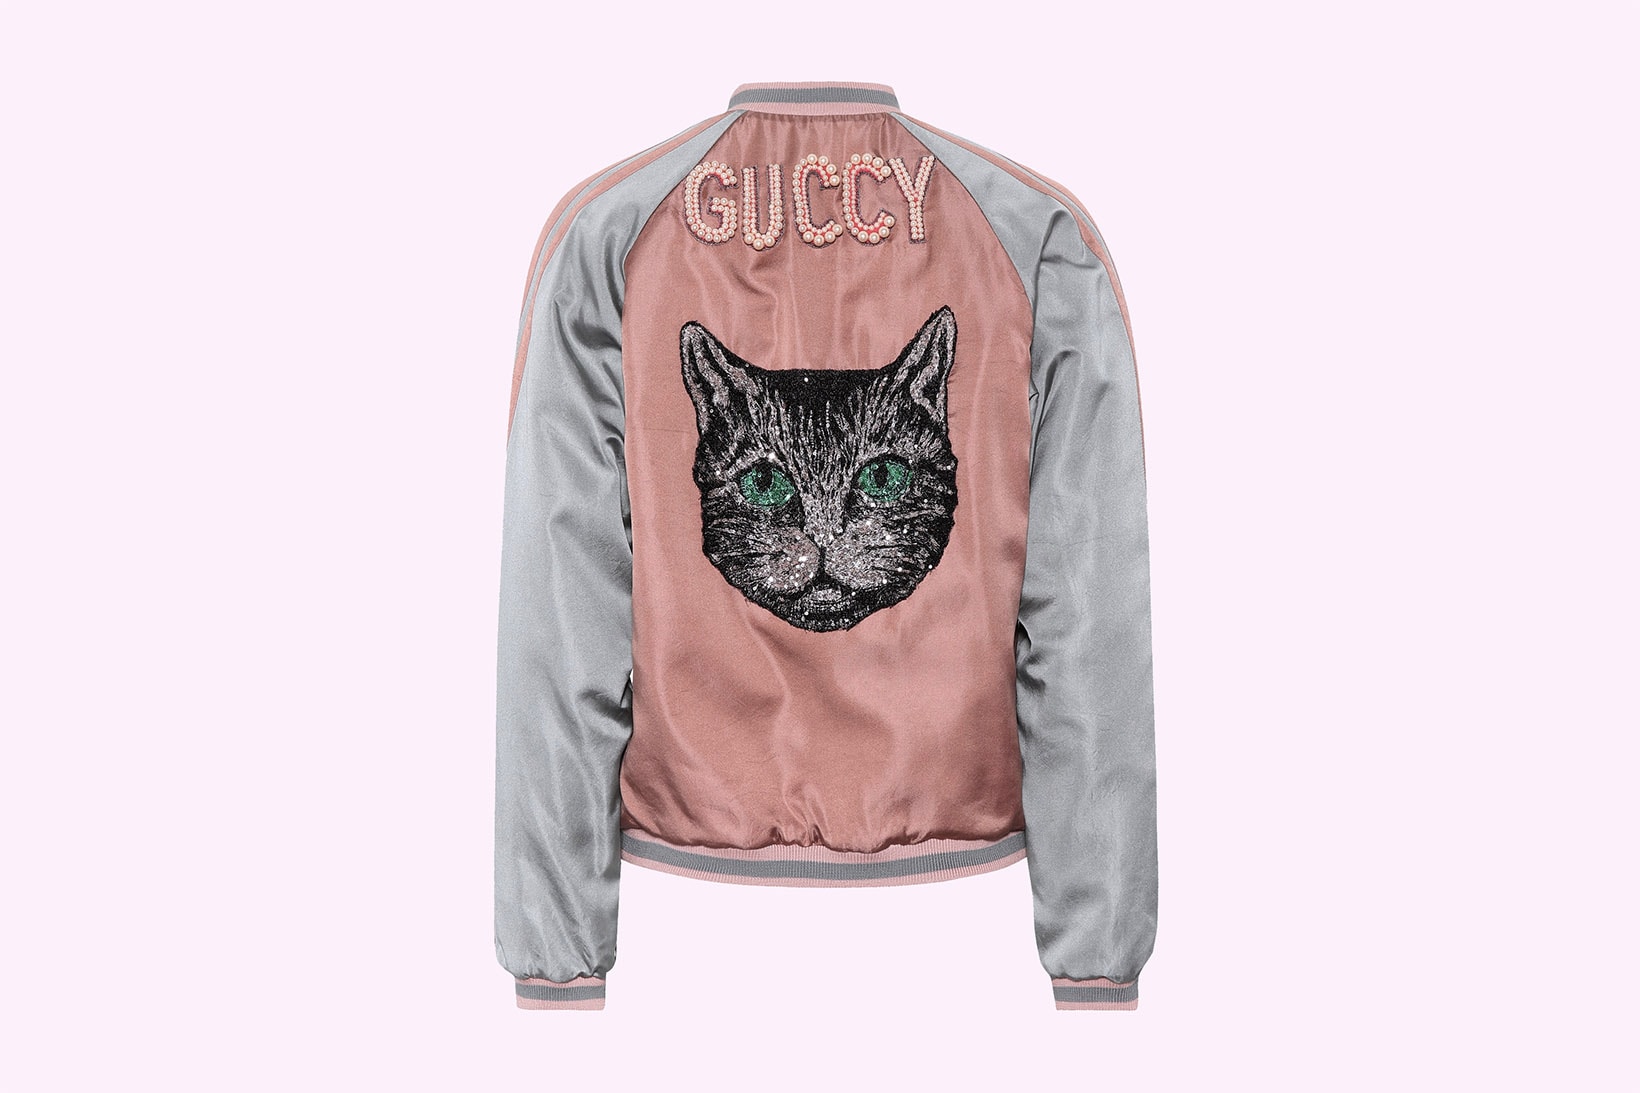 Gucci Embellished Guccy Cat Satin Bomber Jacket bootleg sequins pearls pink grey silver retro where to buy mytheresa.com alessandro michele